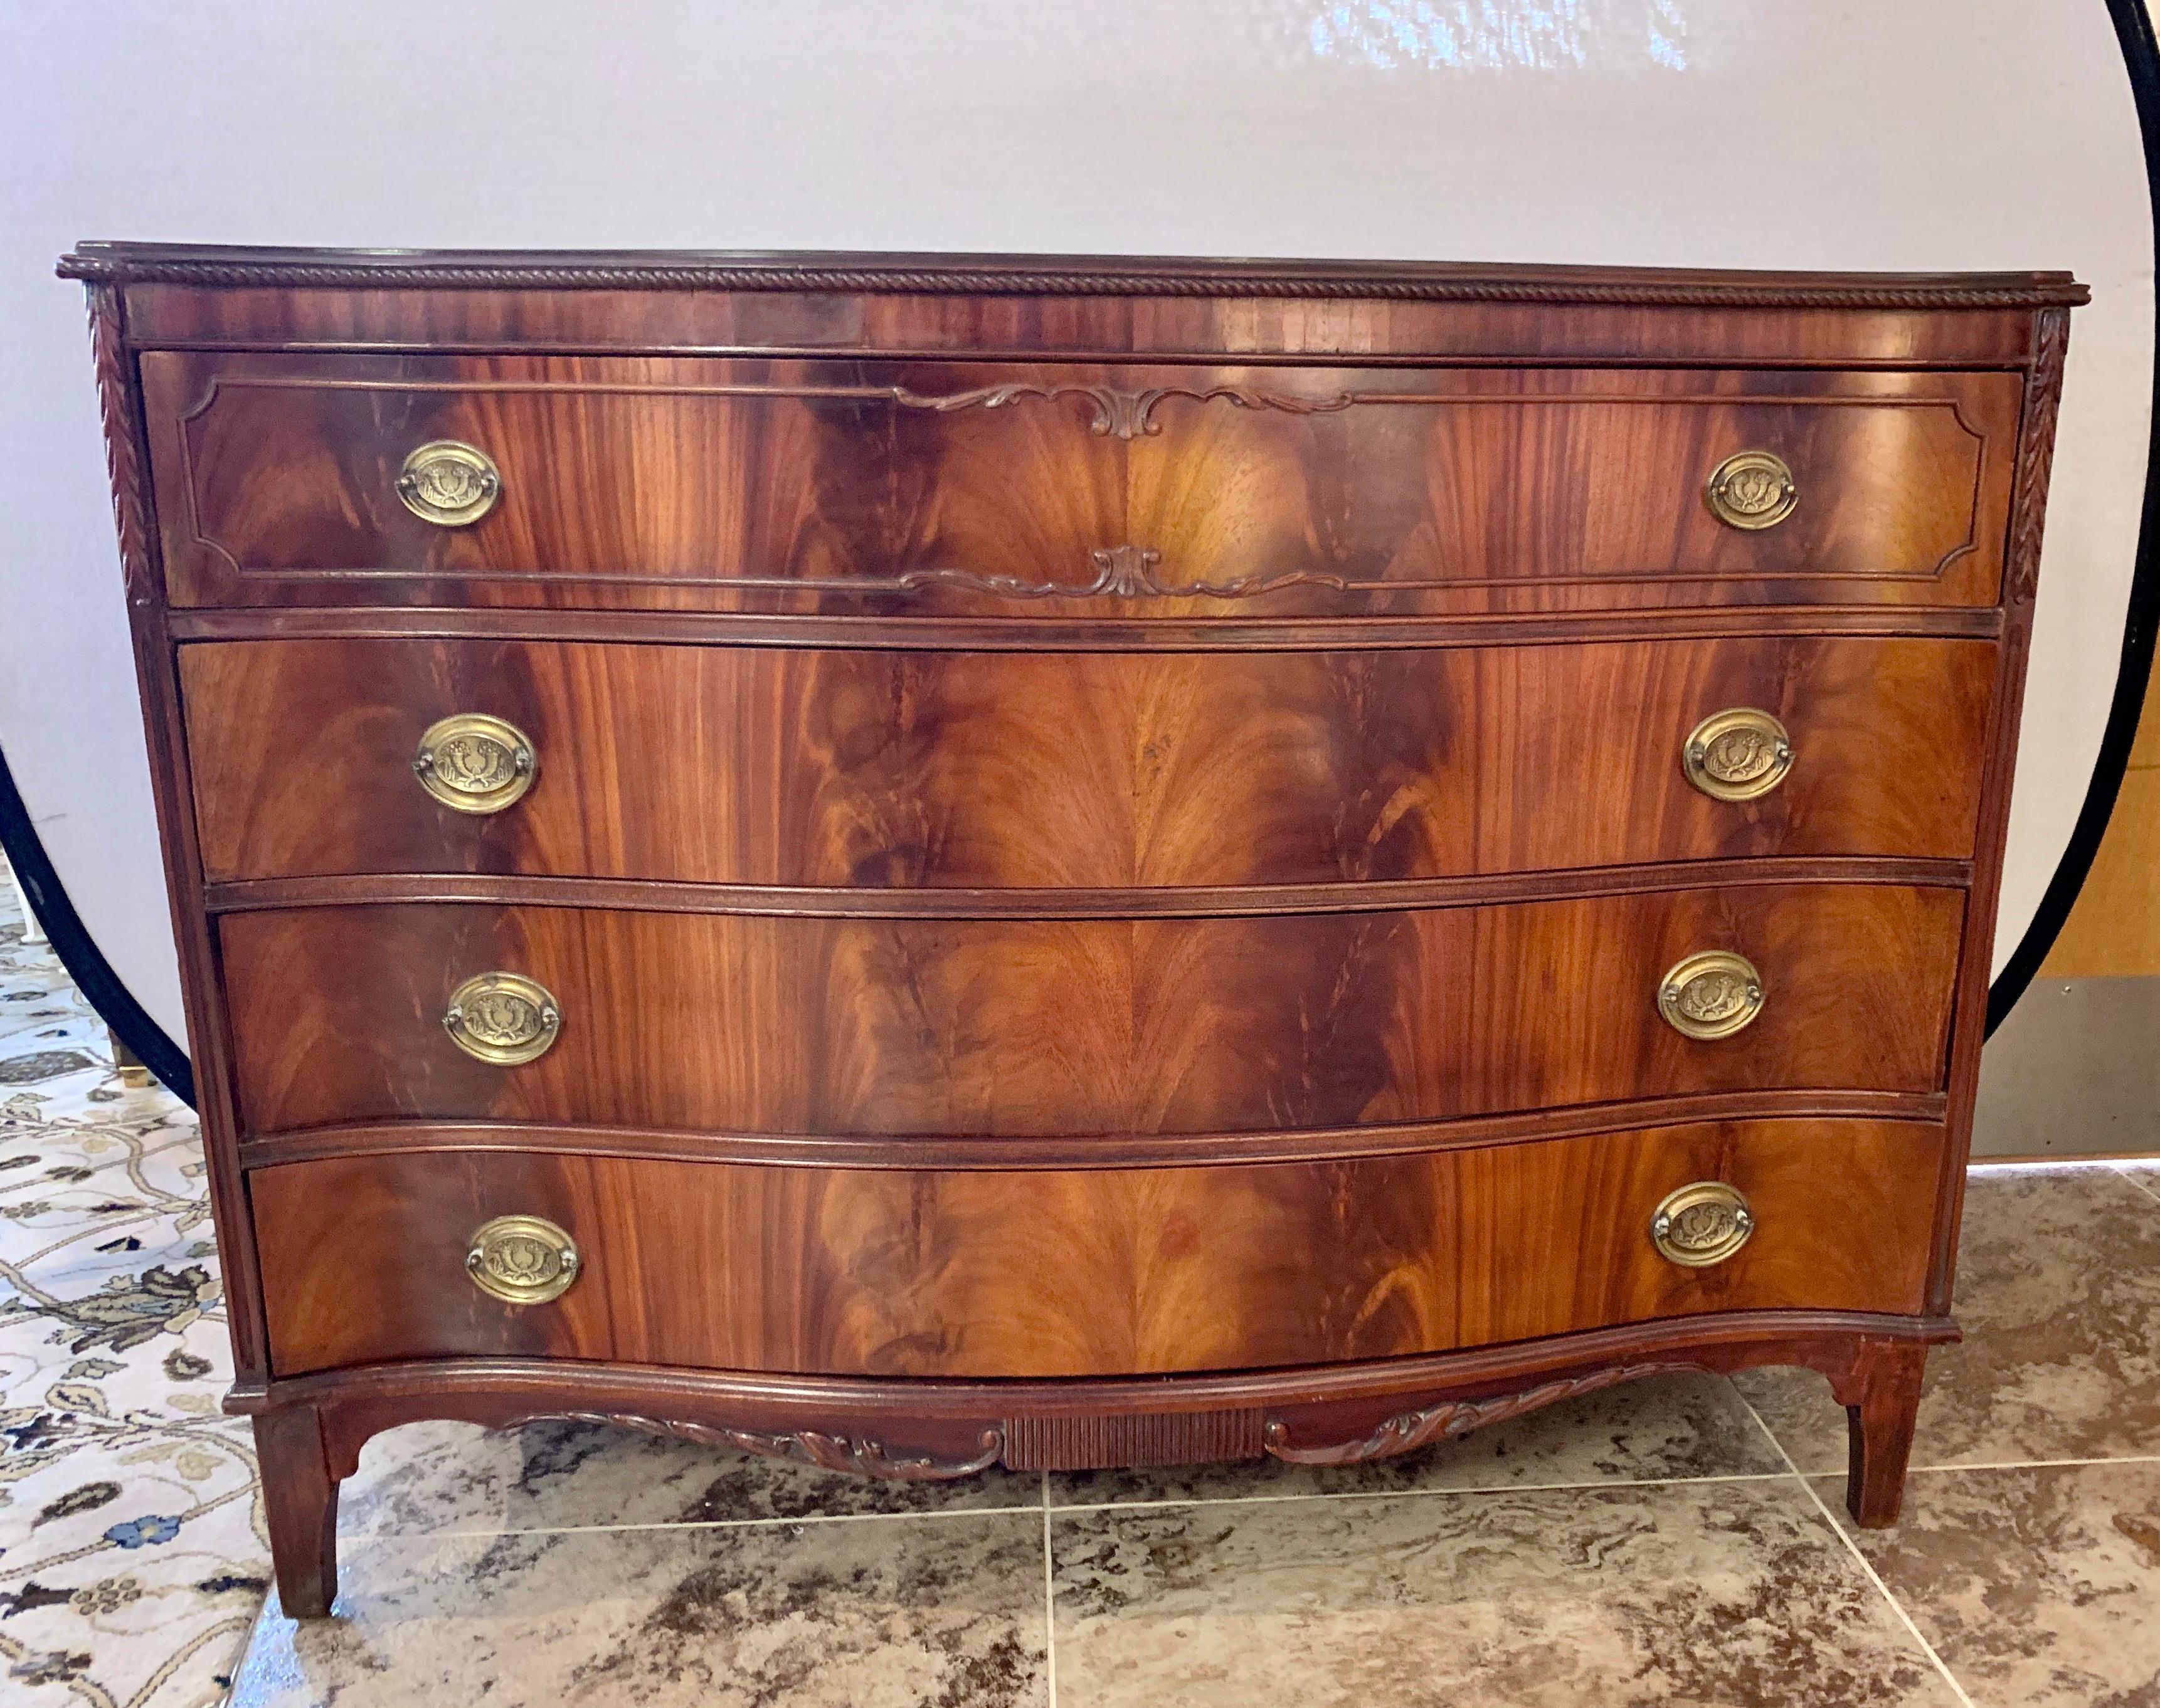 Elegant early 20th century flame mahogany serpentine commode with original brass hardware and four dovetailed drawers. Great lines and better scale.
Now, more than ever, home is where the heart is.